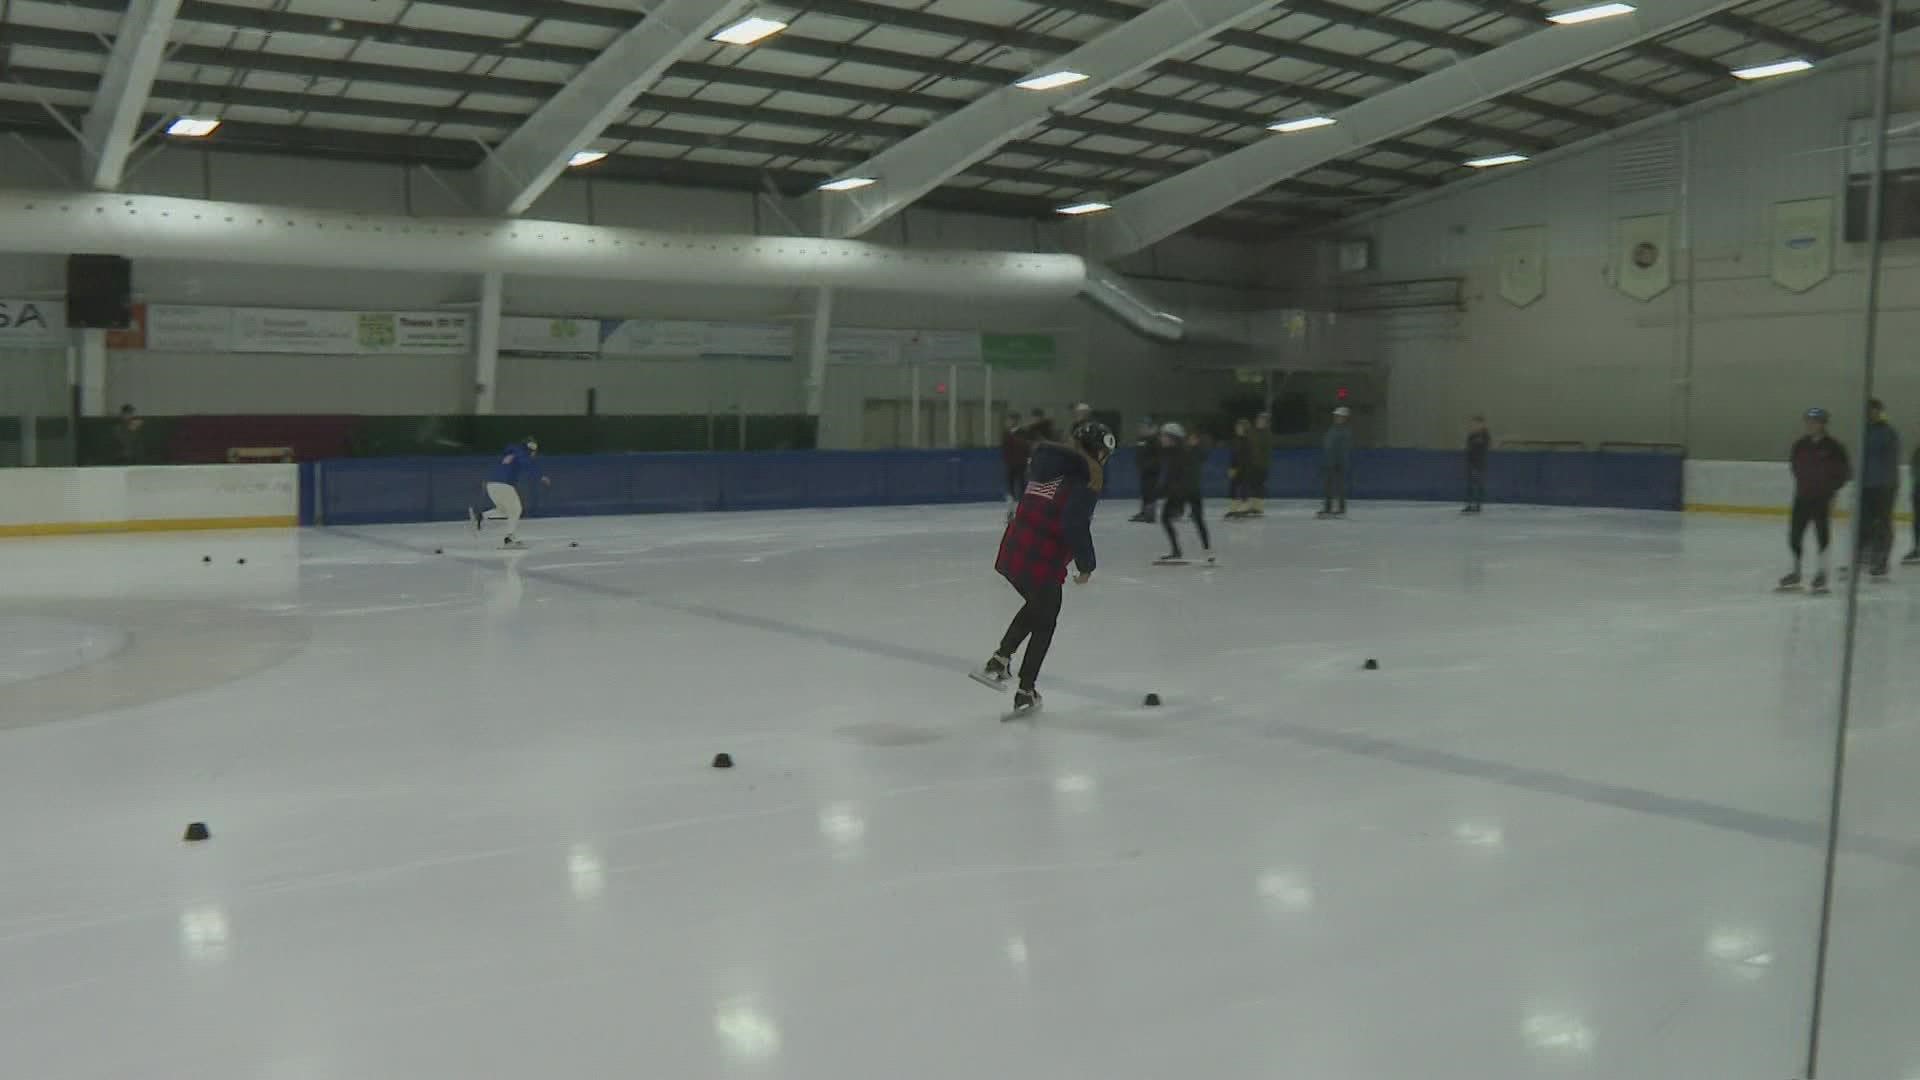 2022 short track Olympians Julie Letai and Kristen Santos visited the Great Atlantic Speedskating Club at Family Ice Center in Falmouth.